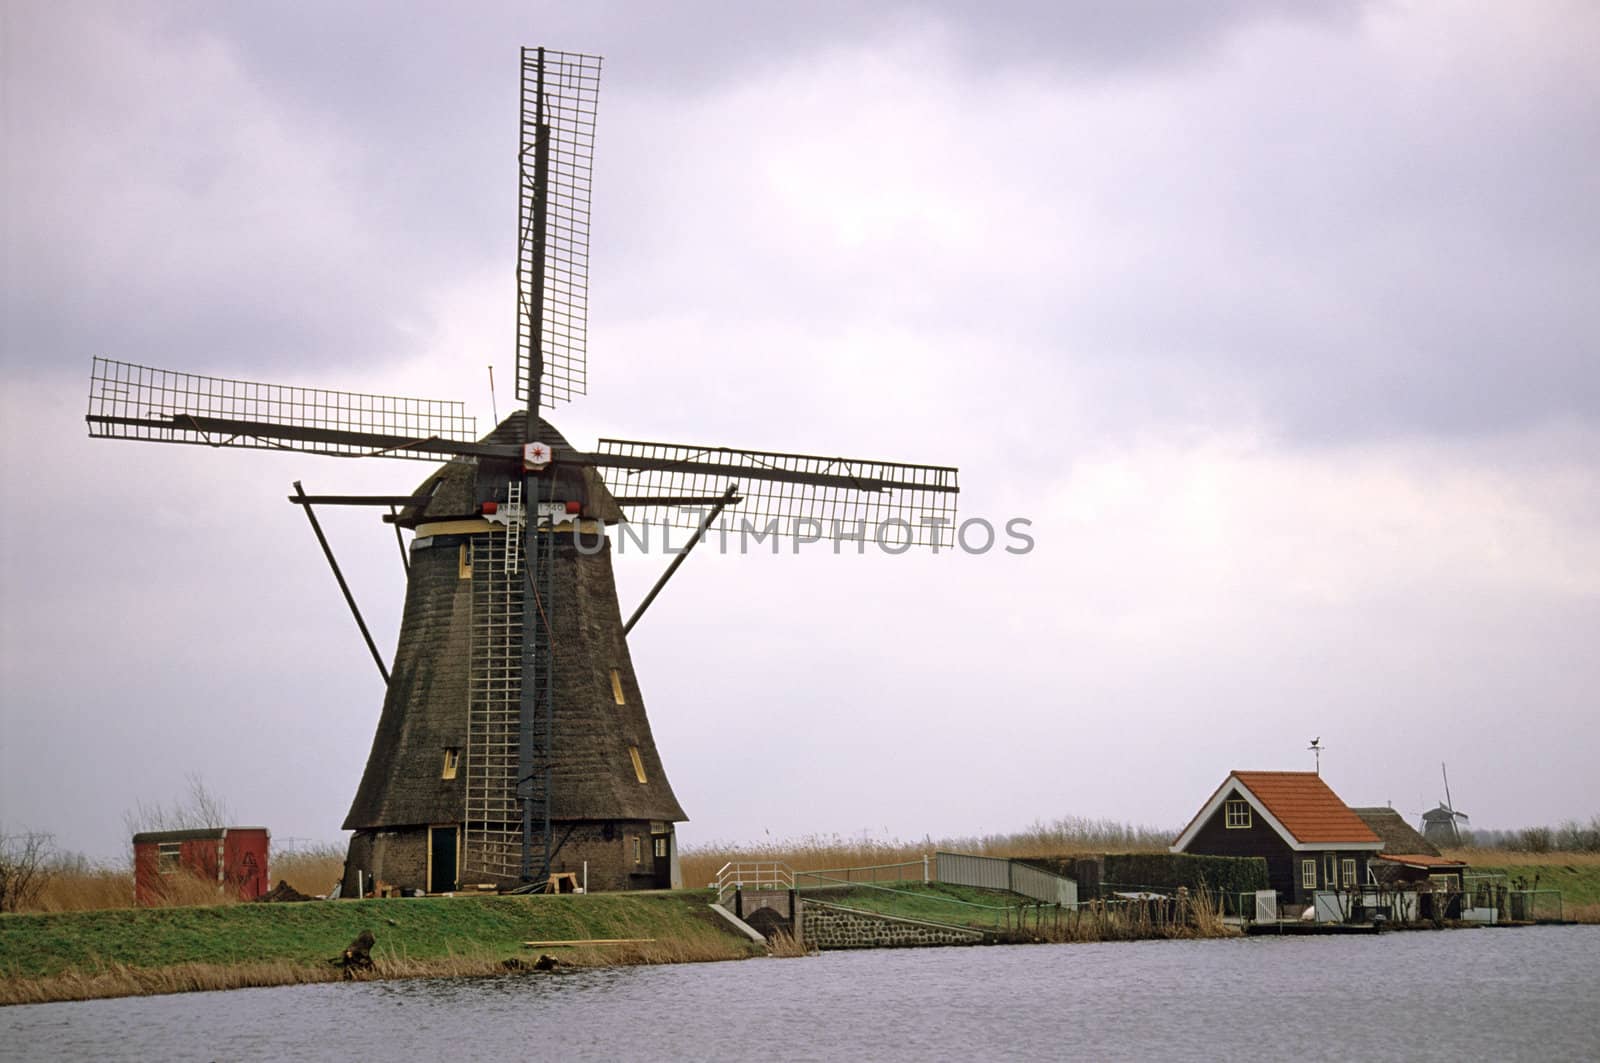 A traditional Dutch windmill at the UNESCO site, Kinderdijk-Elshout in the Netherlands.